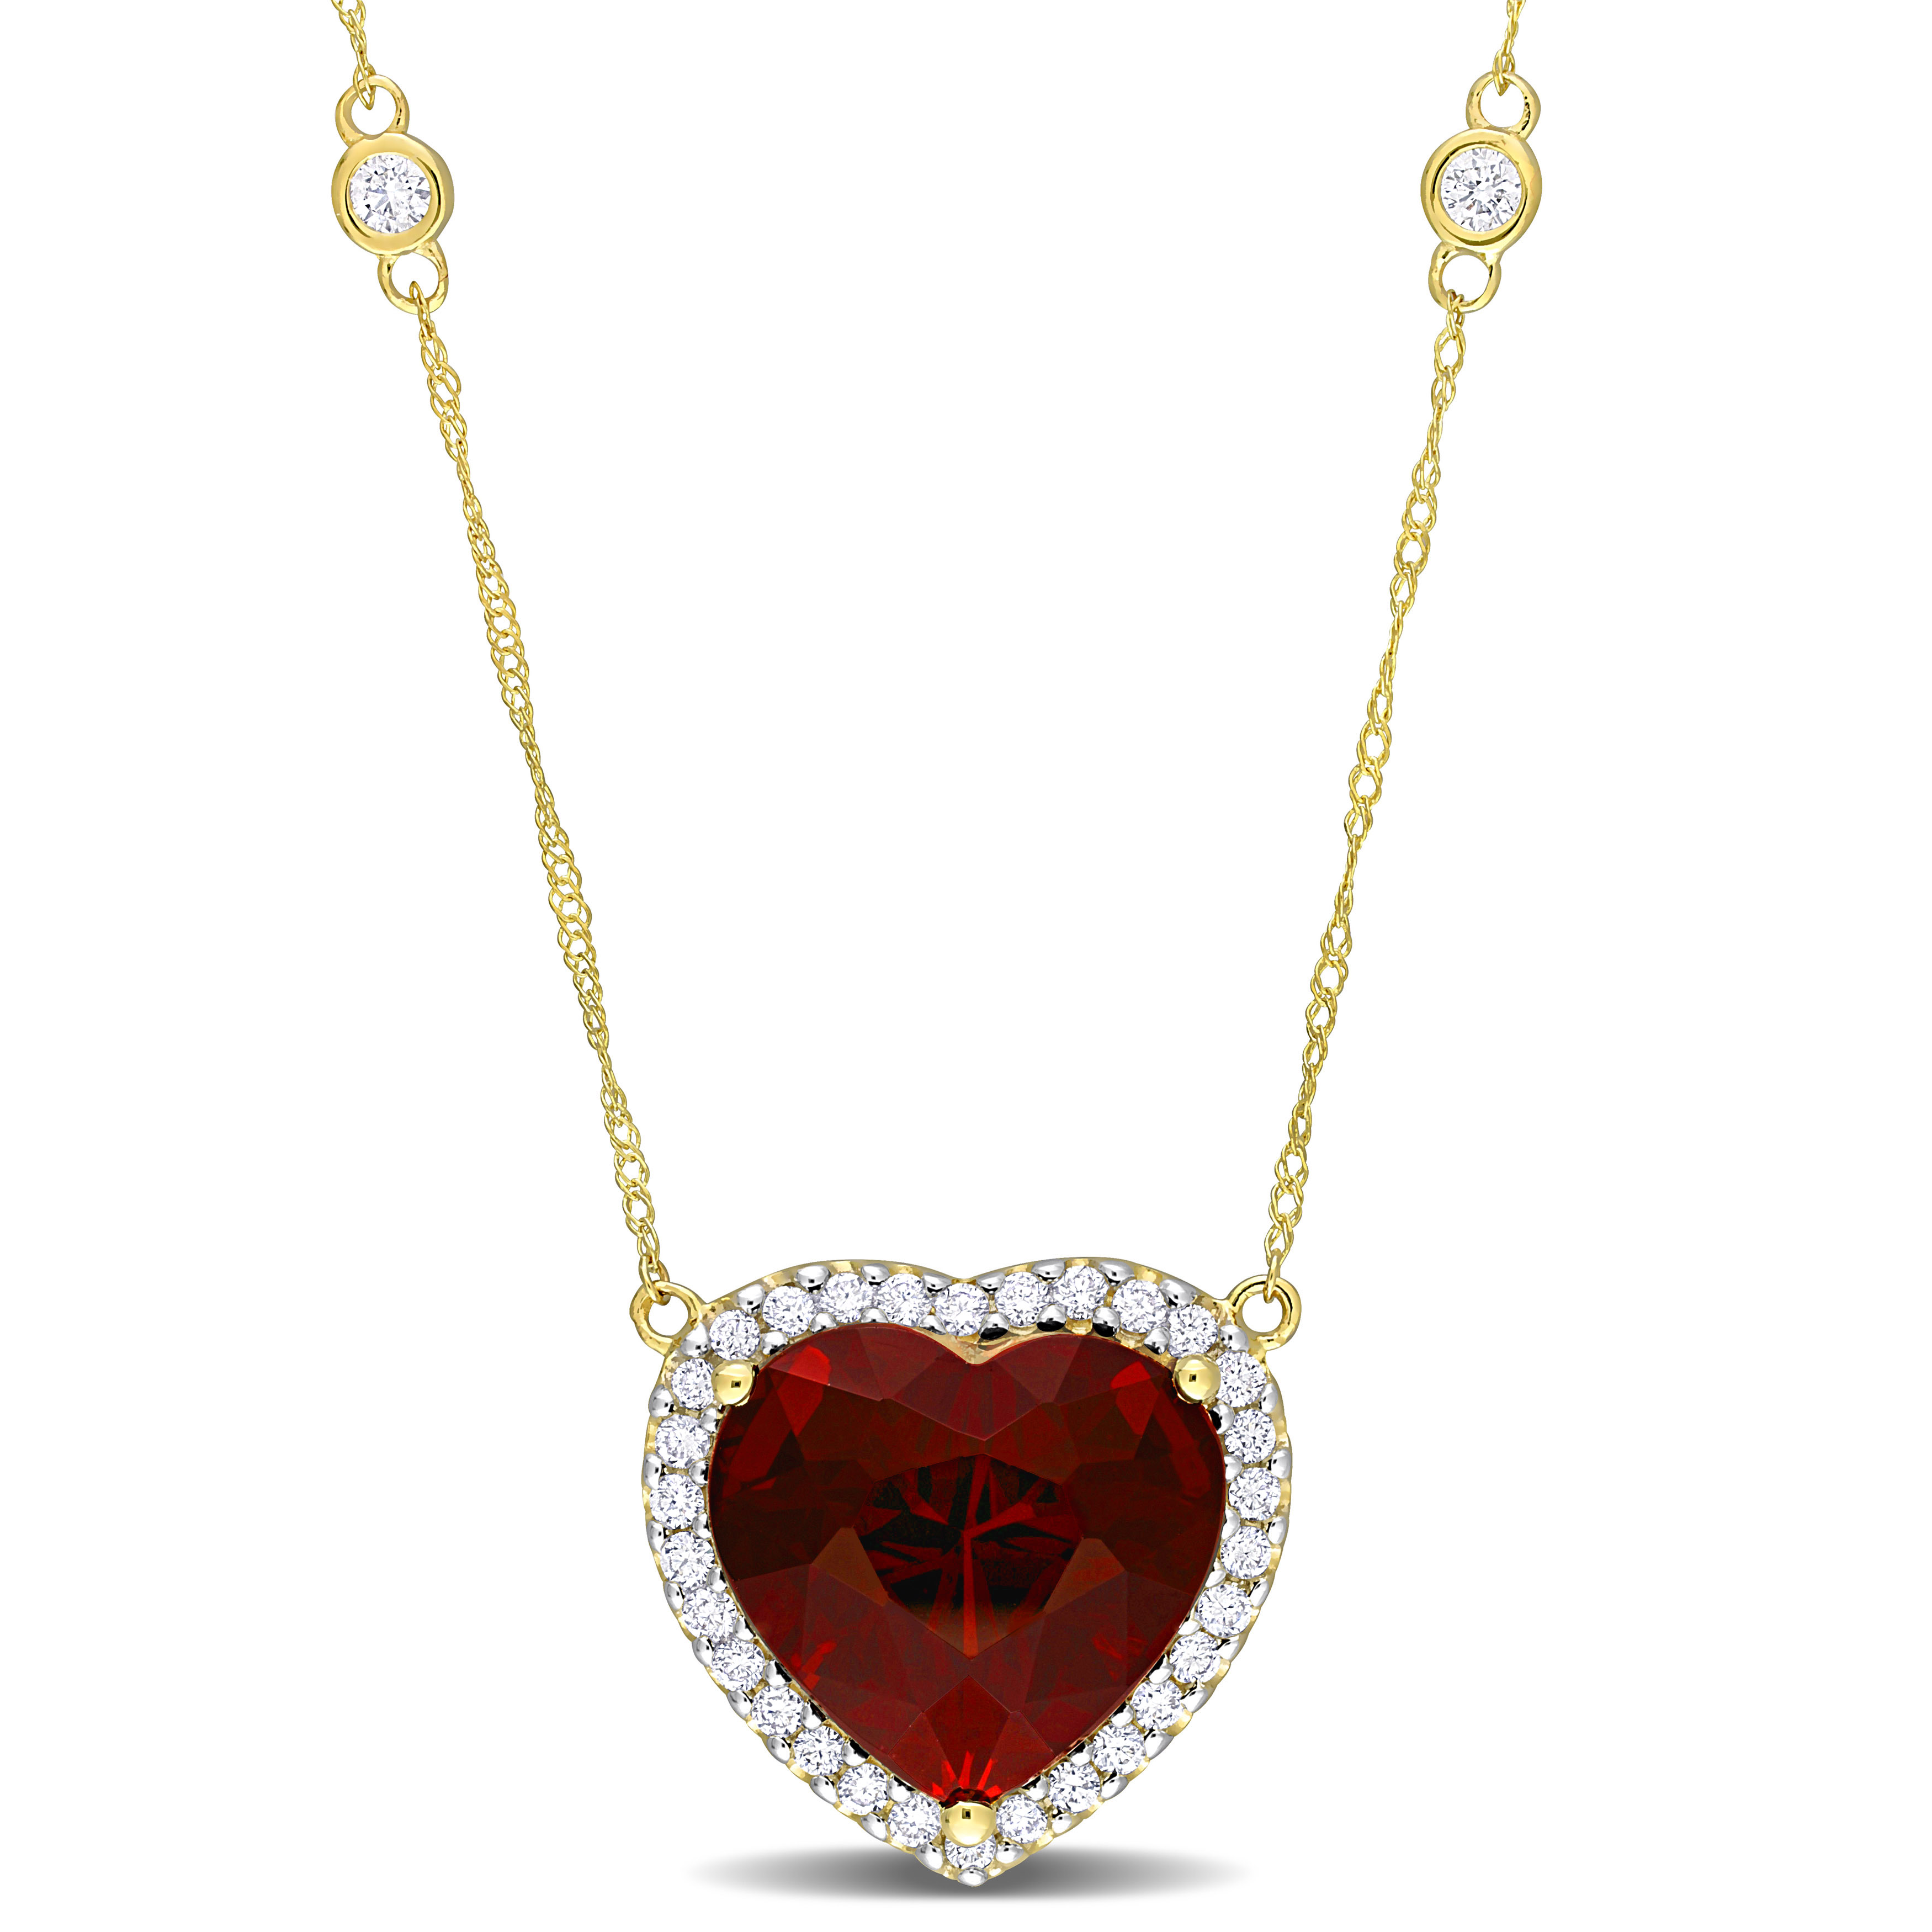 10 1/3 CT TGW Heart-Cut Garnet and 3/8ct TDW Diamond Halo Necklace in 14k Yellow Gold - 16 in.